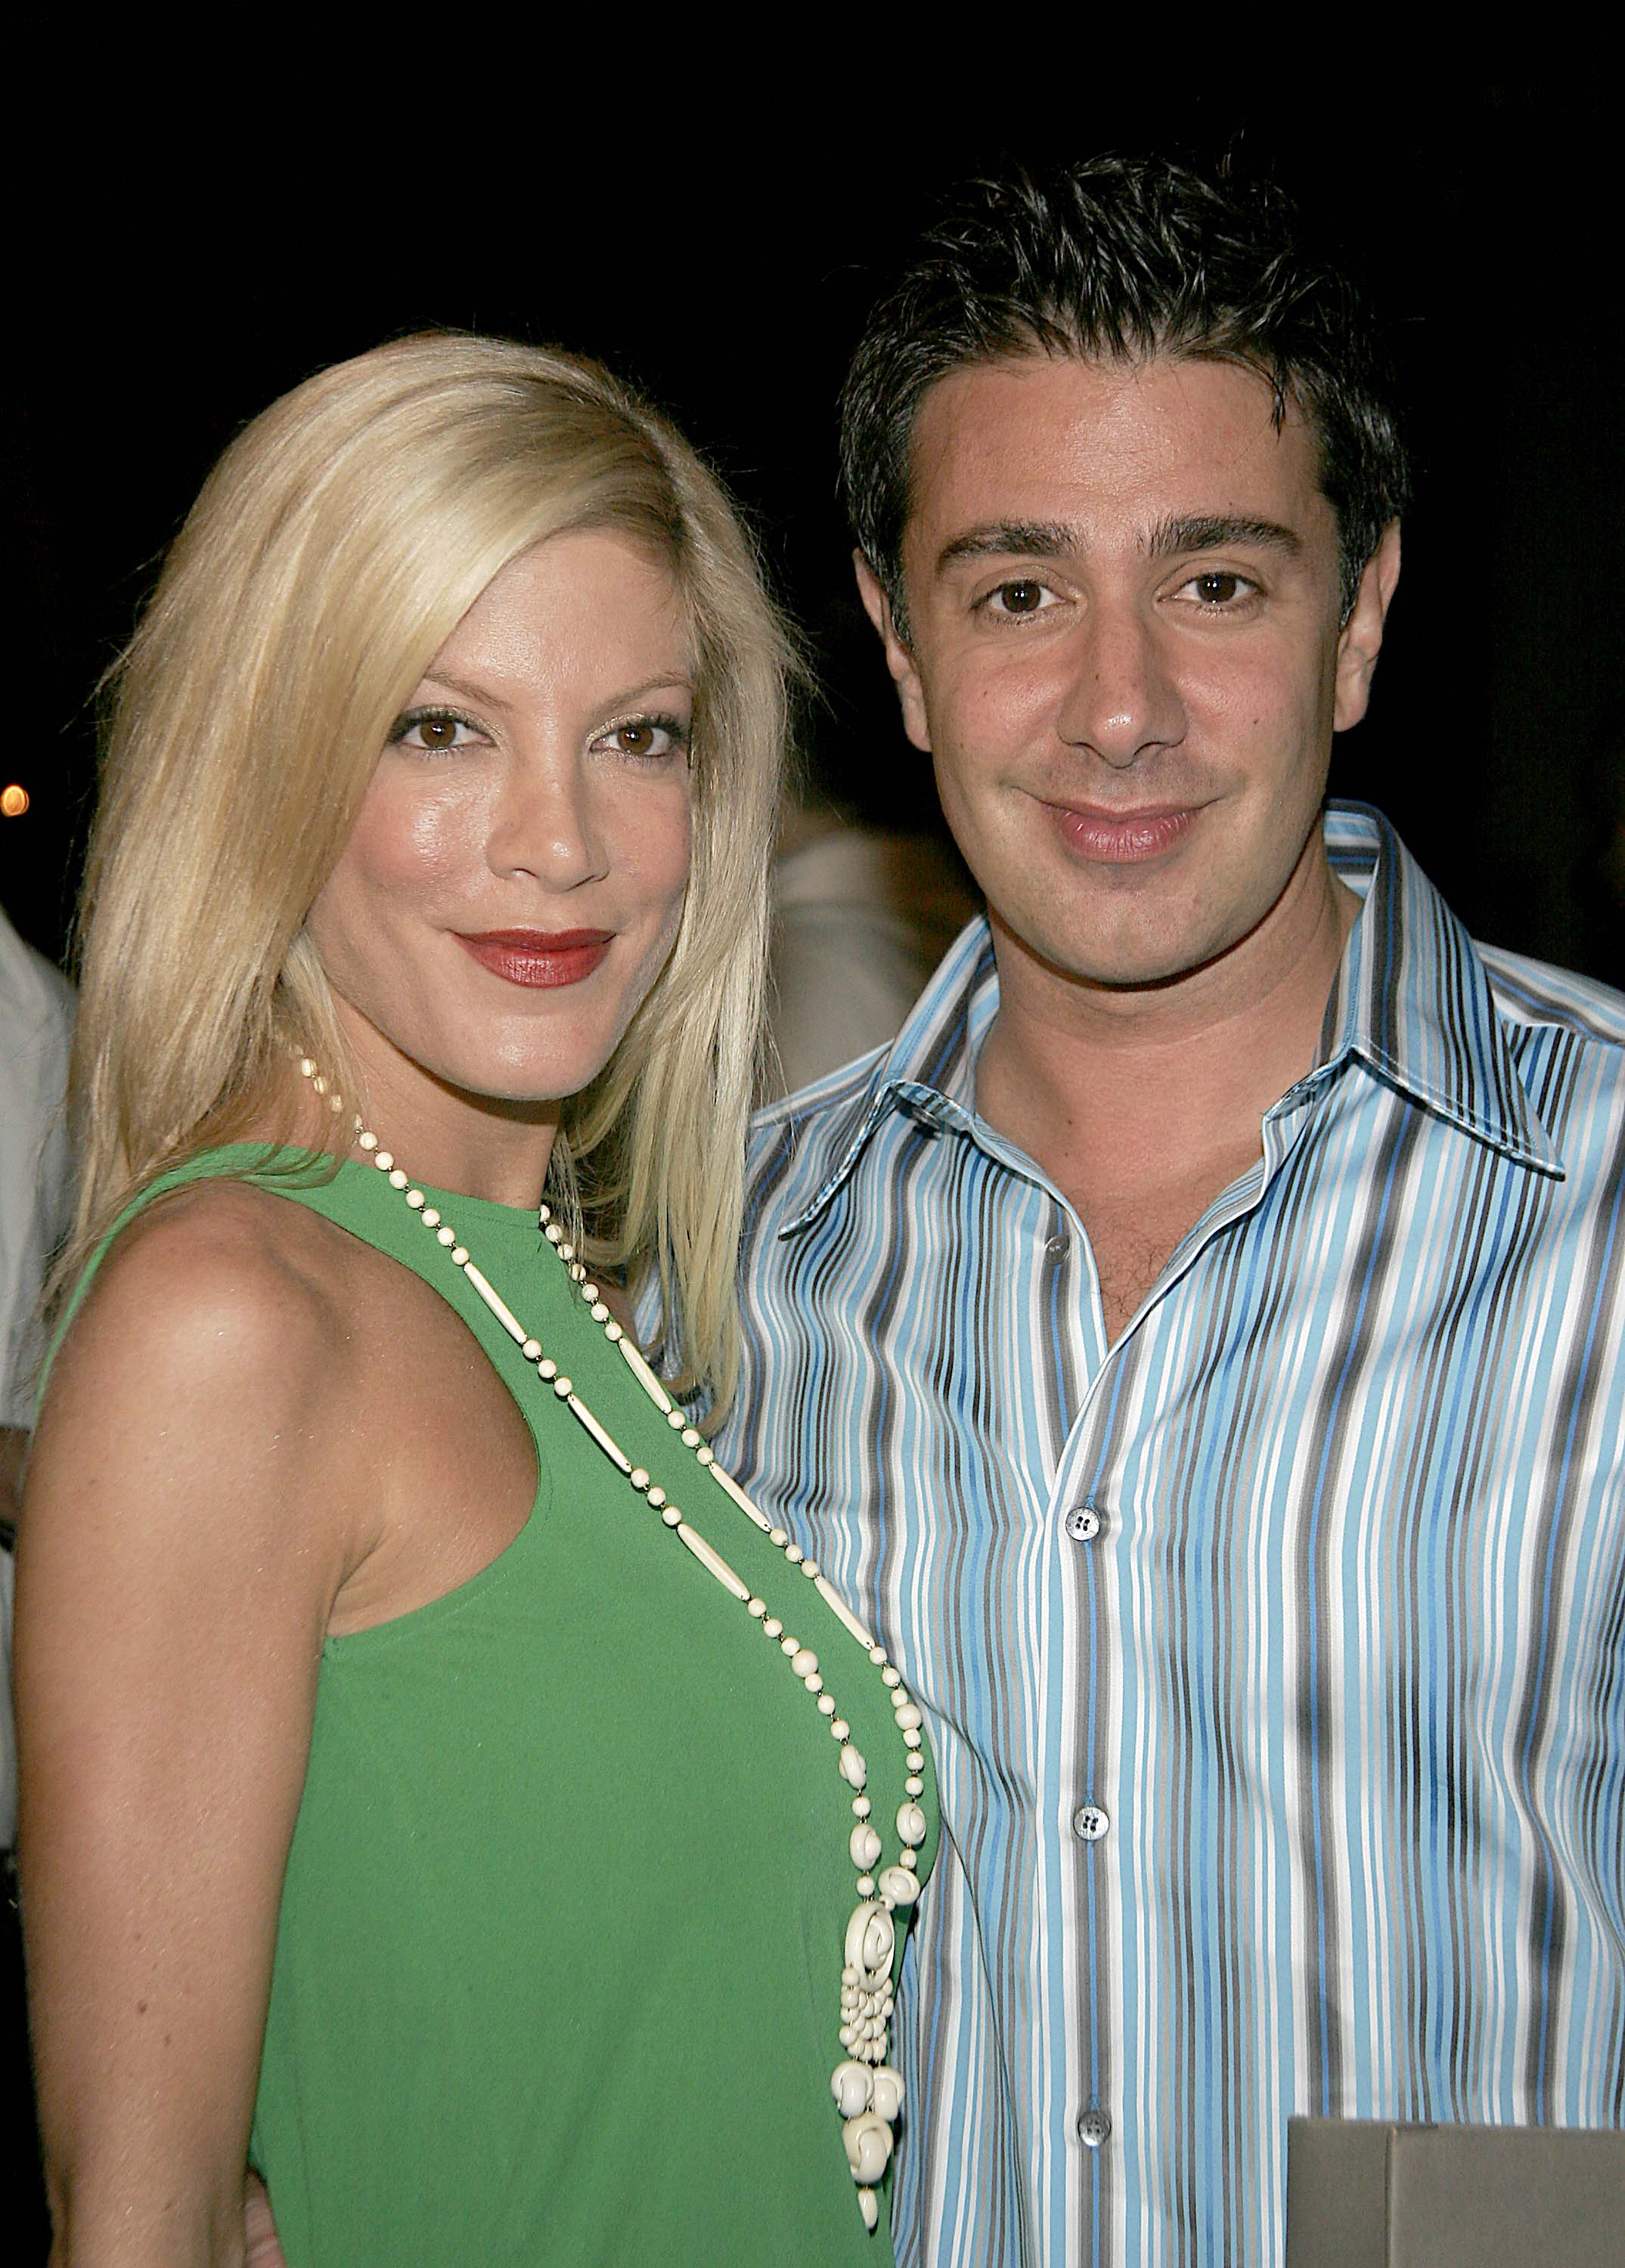 <p><a href="https://www.wonderwall.com/celebrity/profiles/overview/tori-spelling-411.article">Tori Spelling</a> began her relationship with now-husband <a href="https://www.wonderwall.com/celebrity/profiles/overview/dean-mcdermott-625.article">Dean McDermott</a> in a pretty scandalous way. The couple hooked up while filming the 2005 TV movie "Mind Over Murder" despite the fact that they both were married at the time -- he to Mary Jo Eustace, she to Charlie Shanian. They quickly divorced their former partners and exchanged vows with one another.</p>